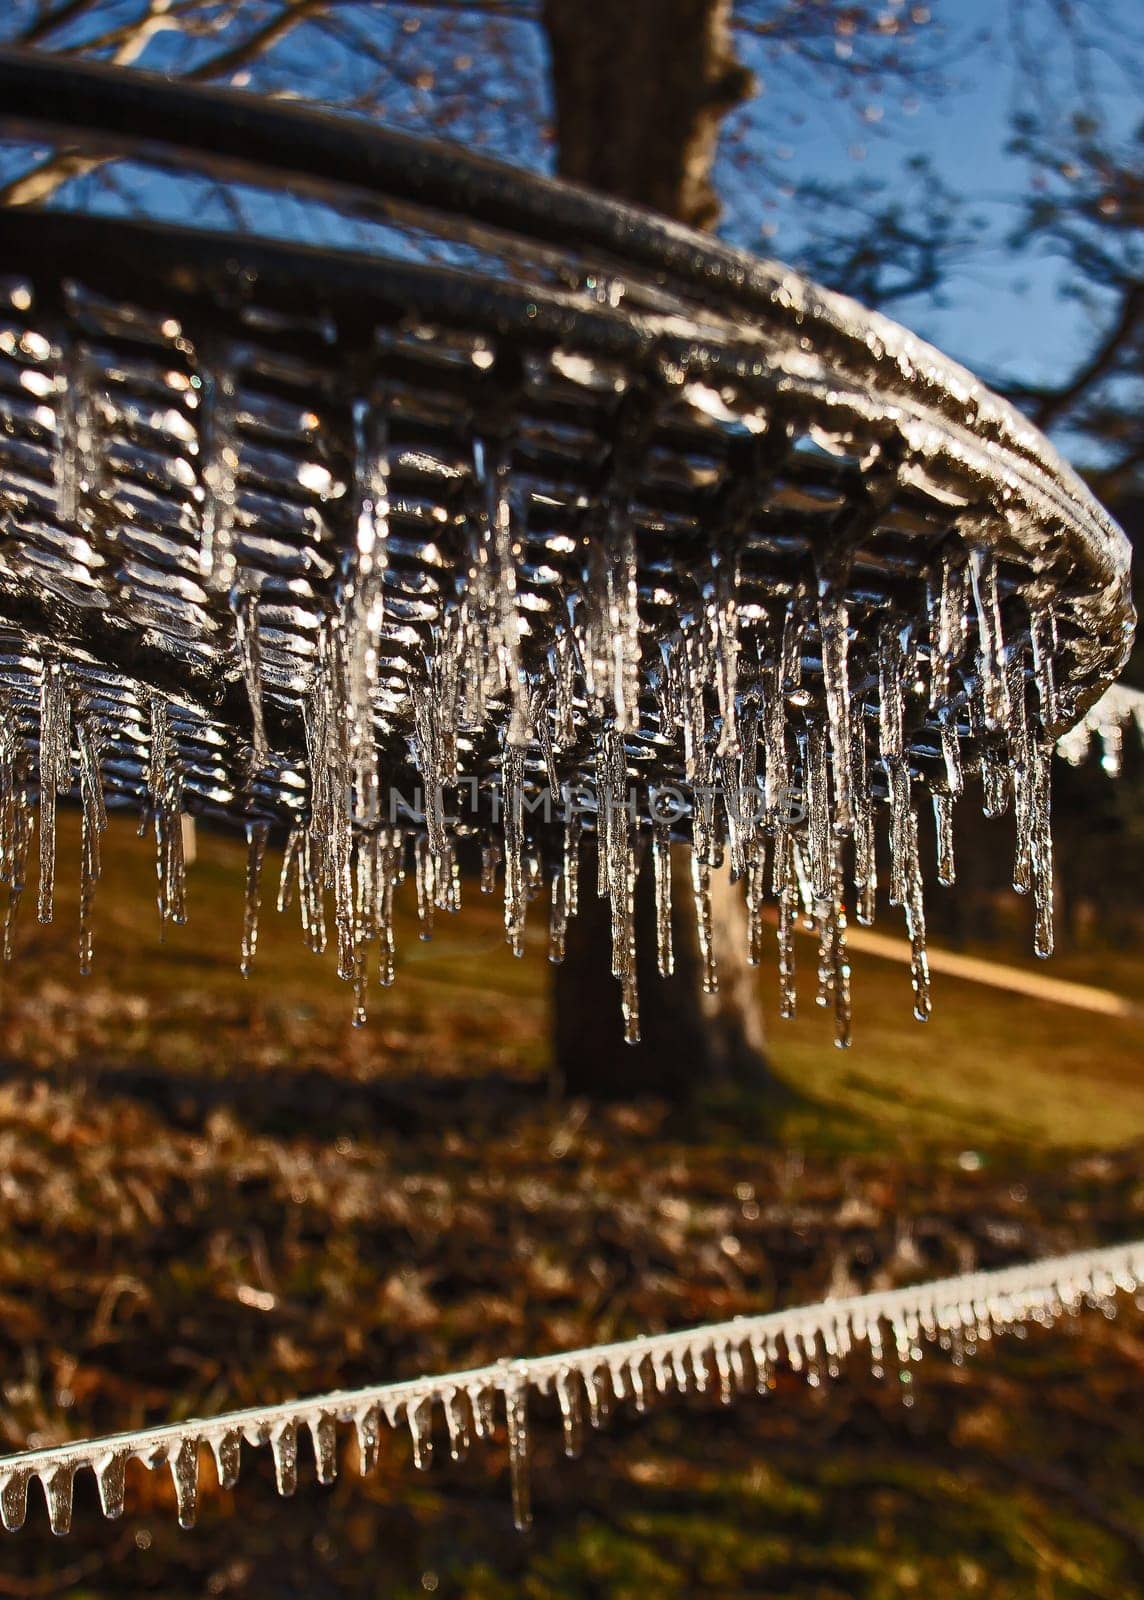 Early Morning Icicles 15472 by kobus_peche